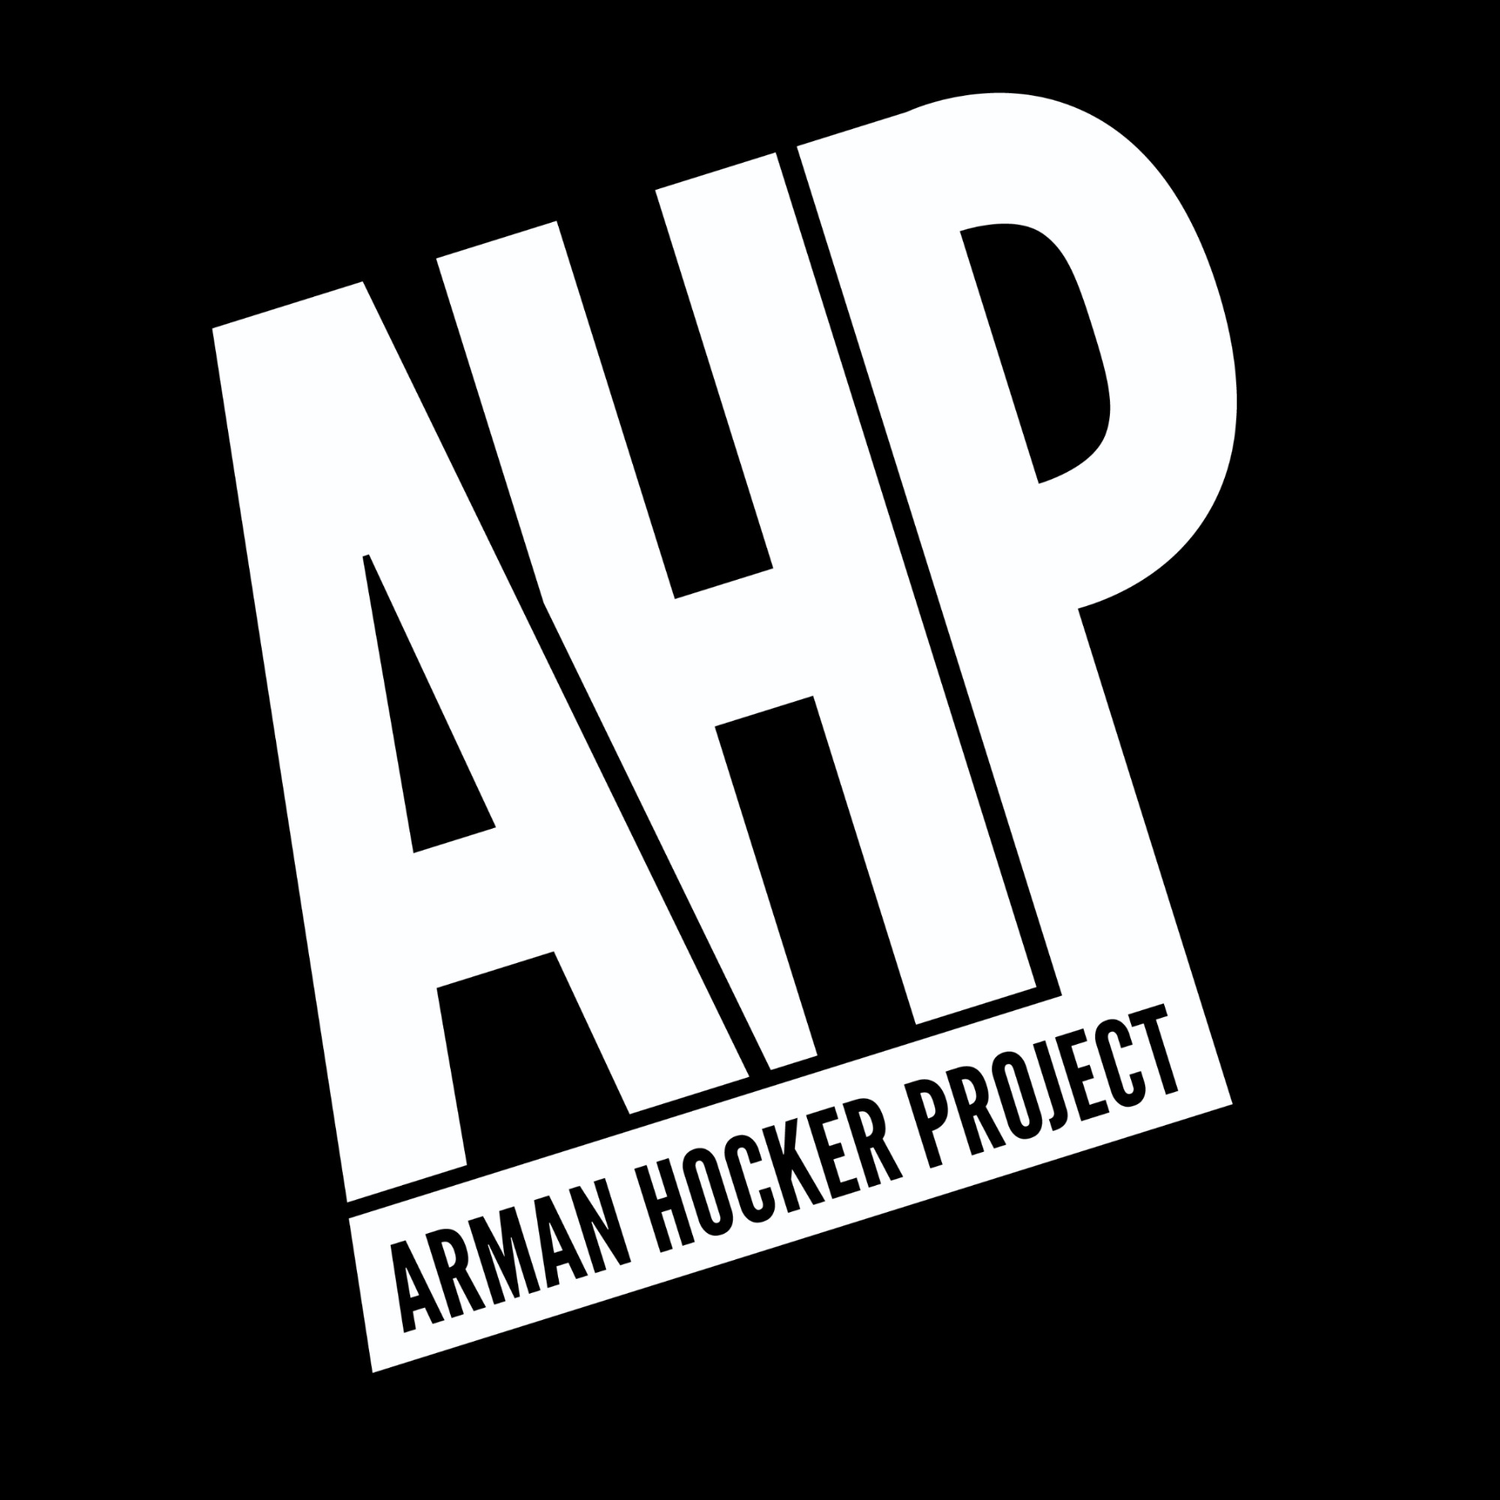 Arman Hocker Project - Official Site